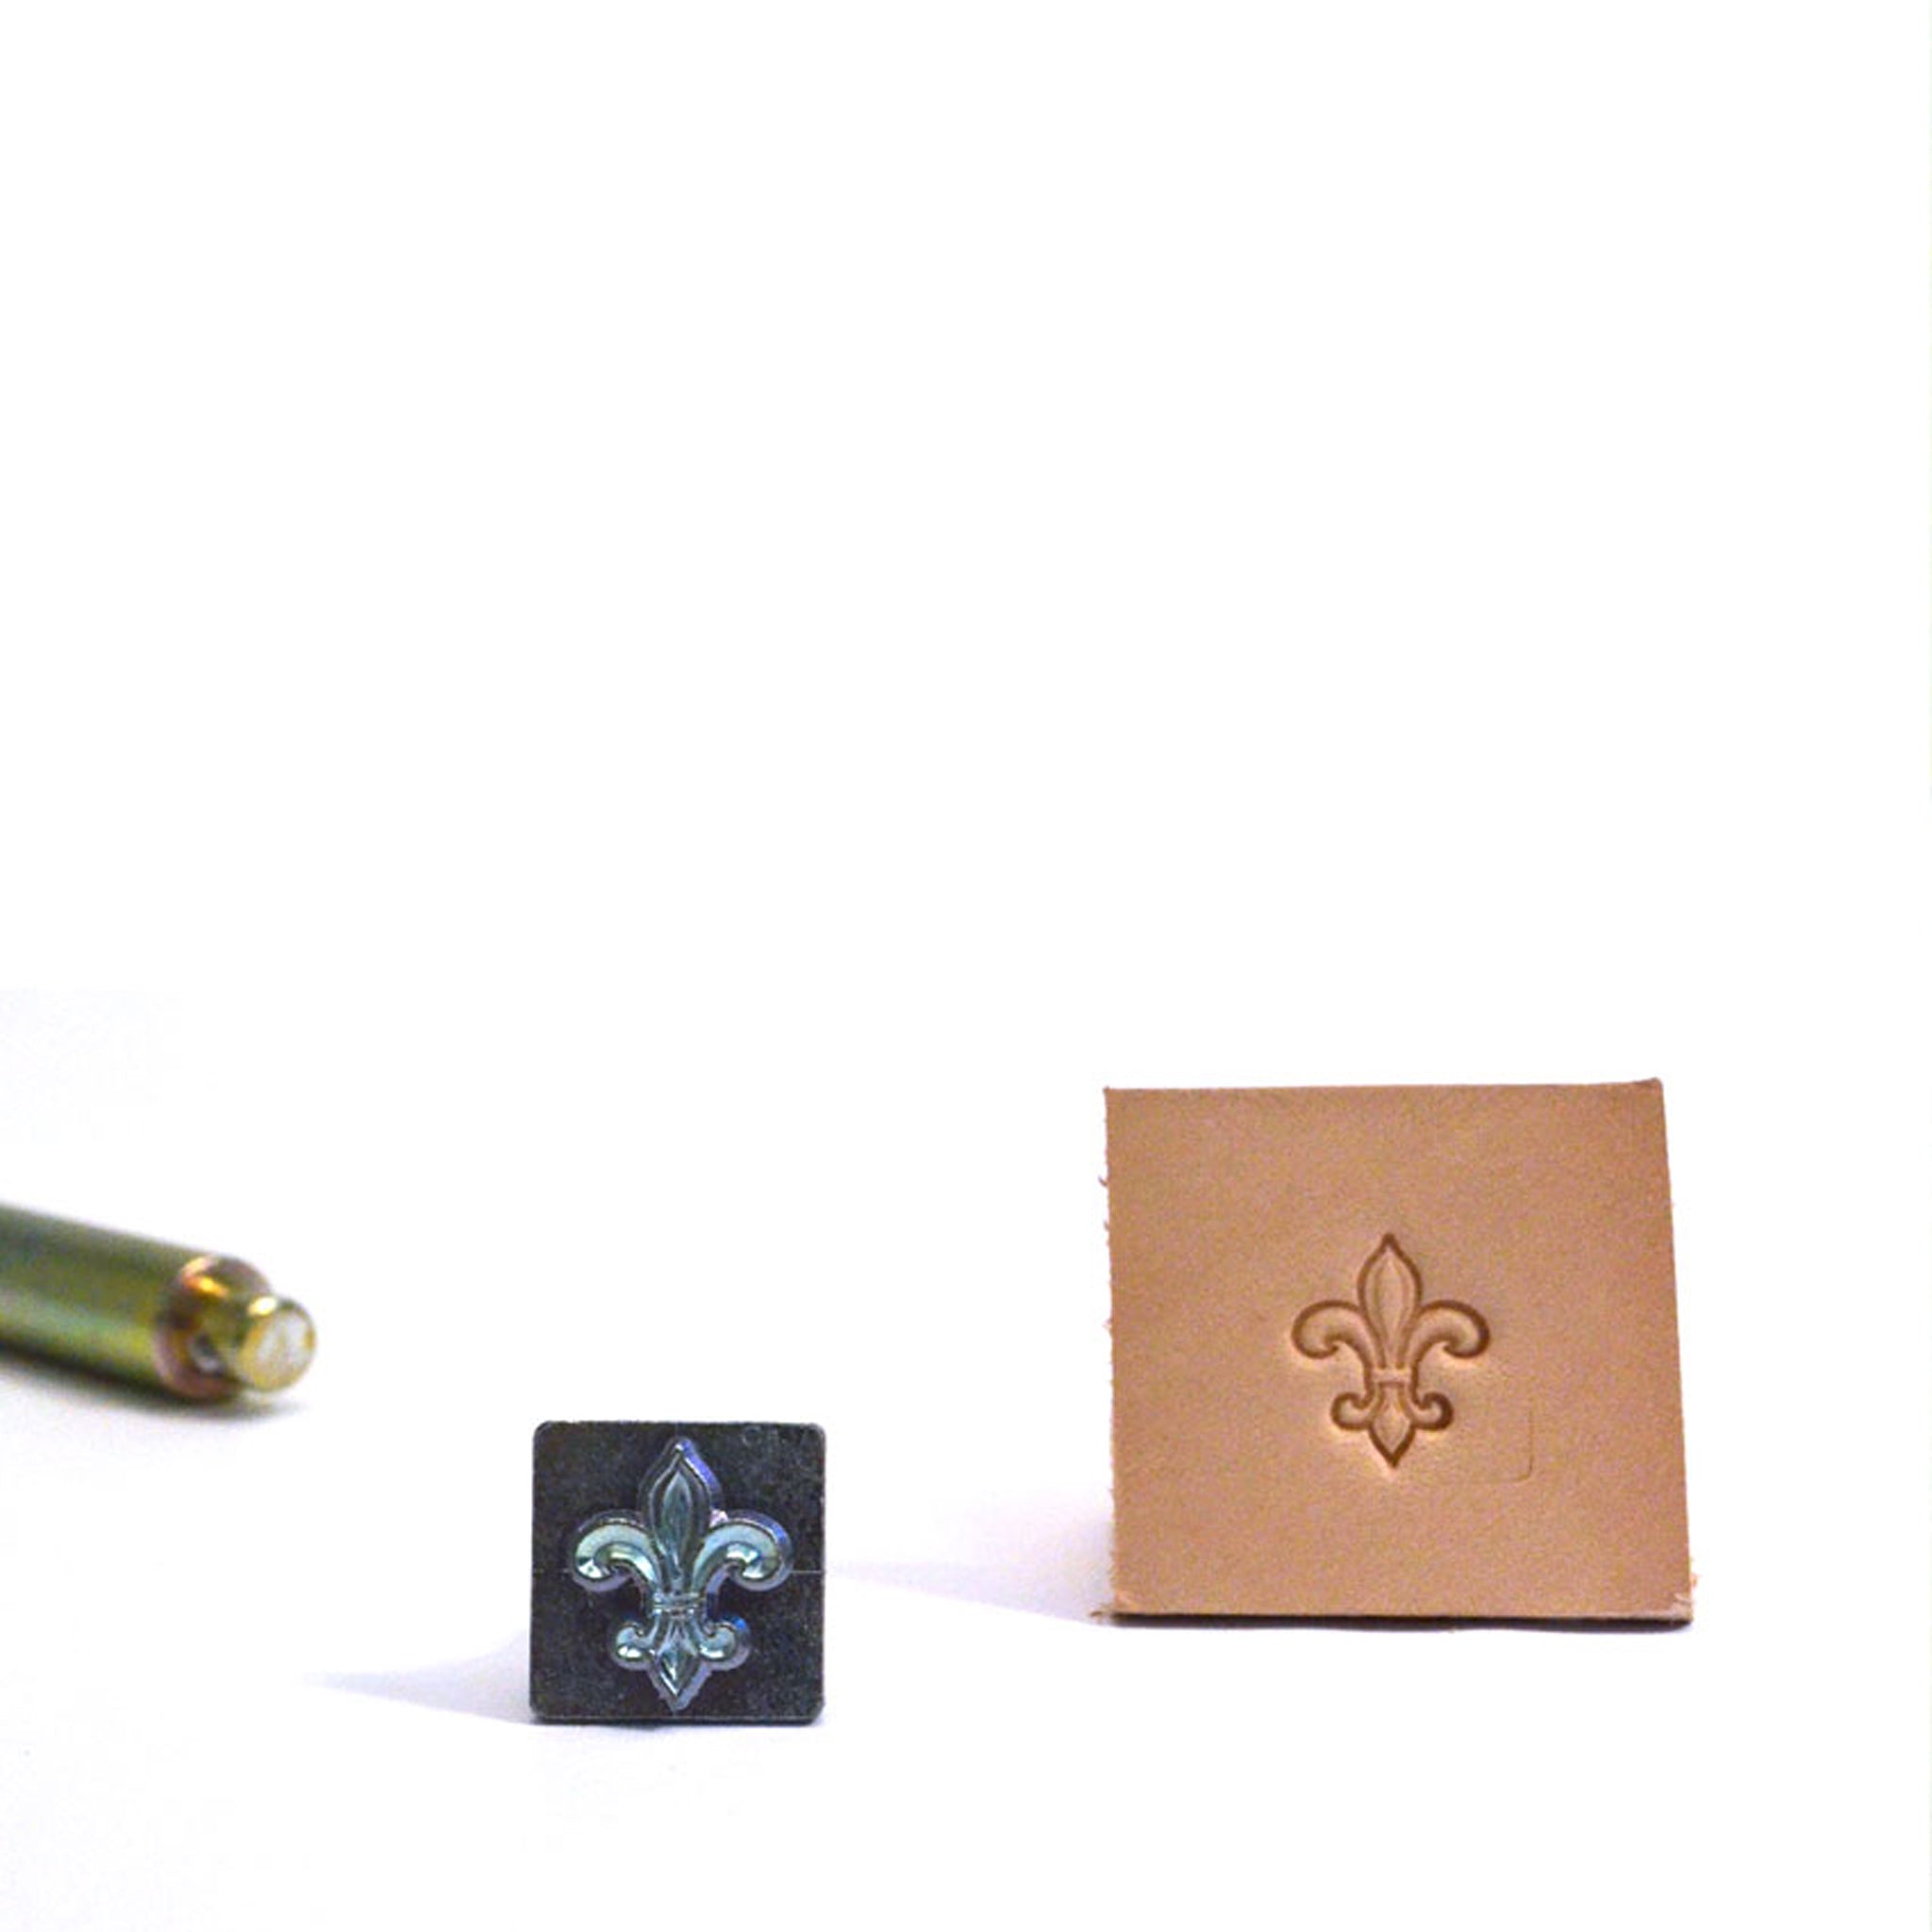 Fleur de Lis Mini 3D Embossing Stamp from Identity Leathercraft